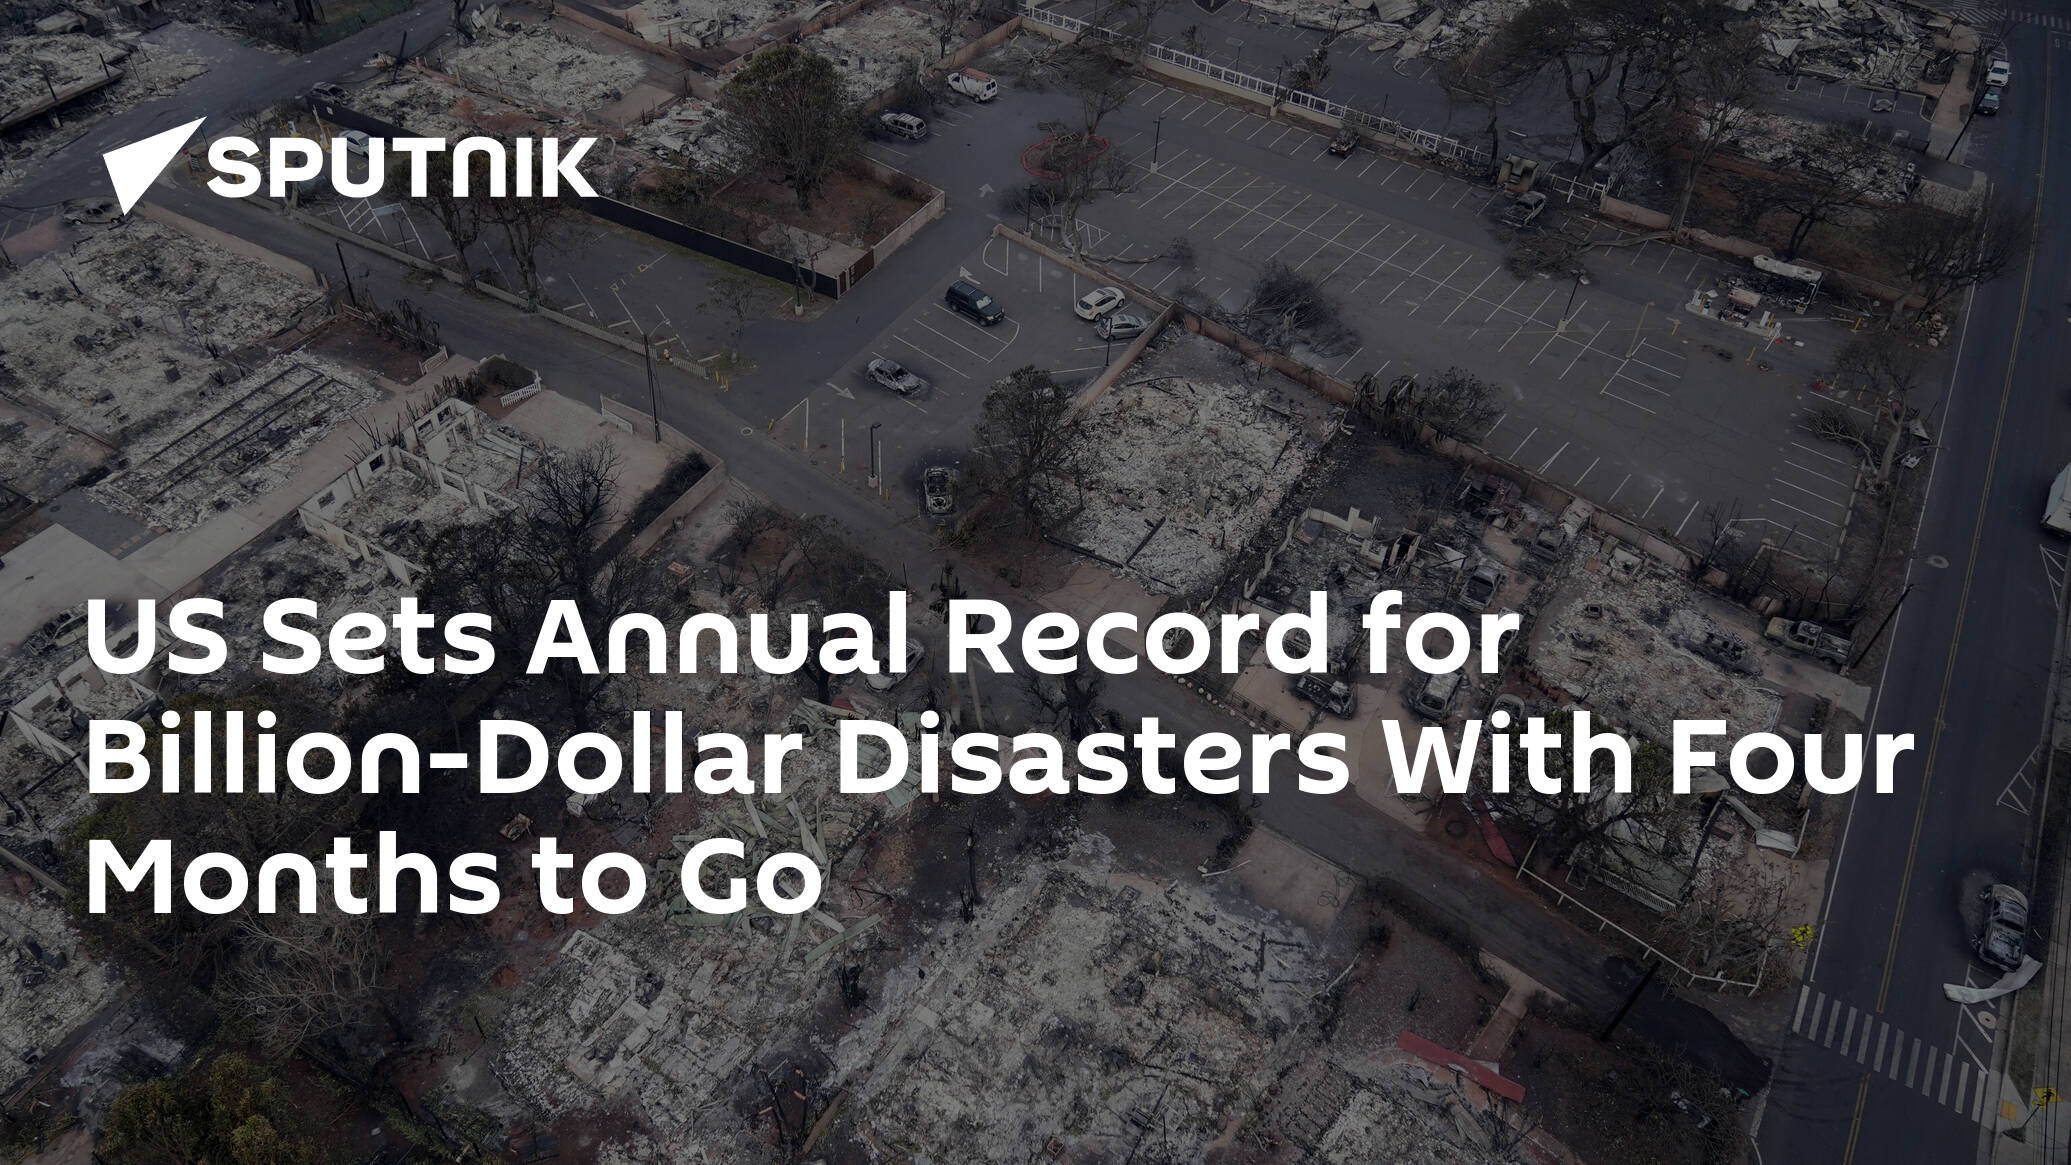 US Sets Annual Record for Billion-Dollar Disasters With Four Months to Go